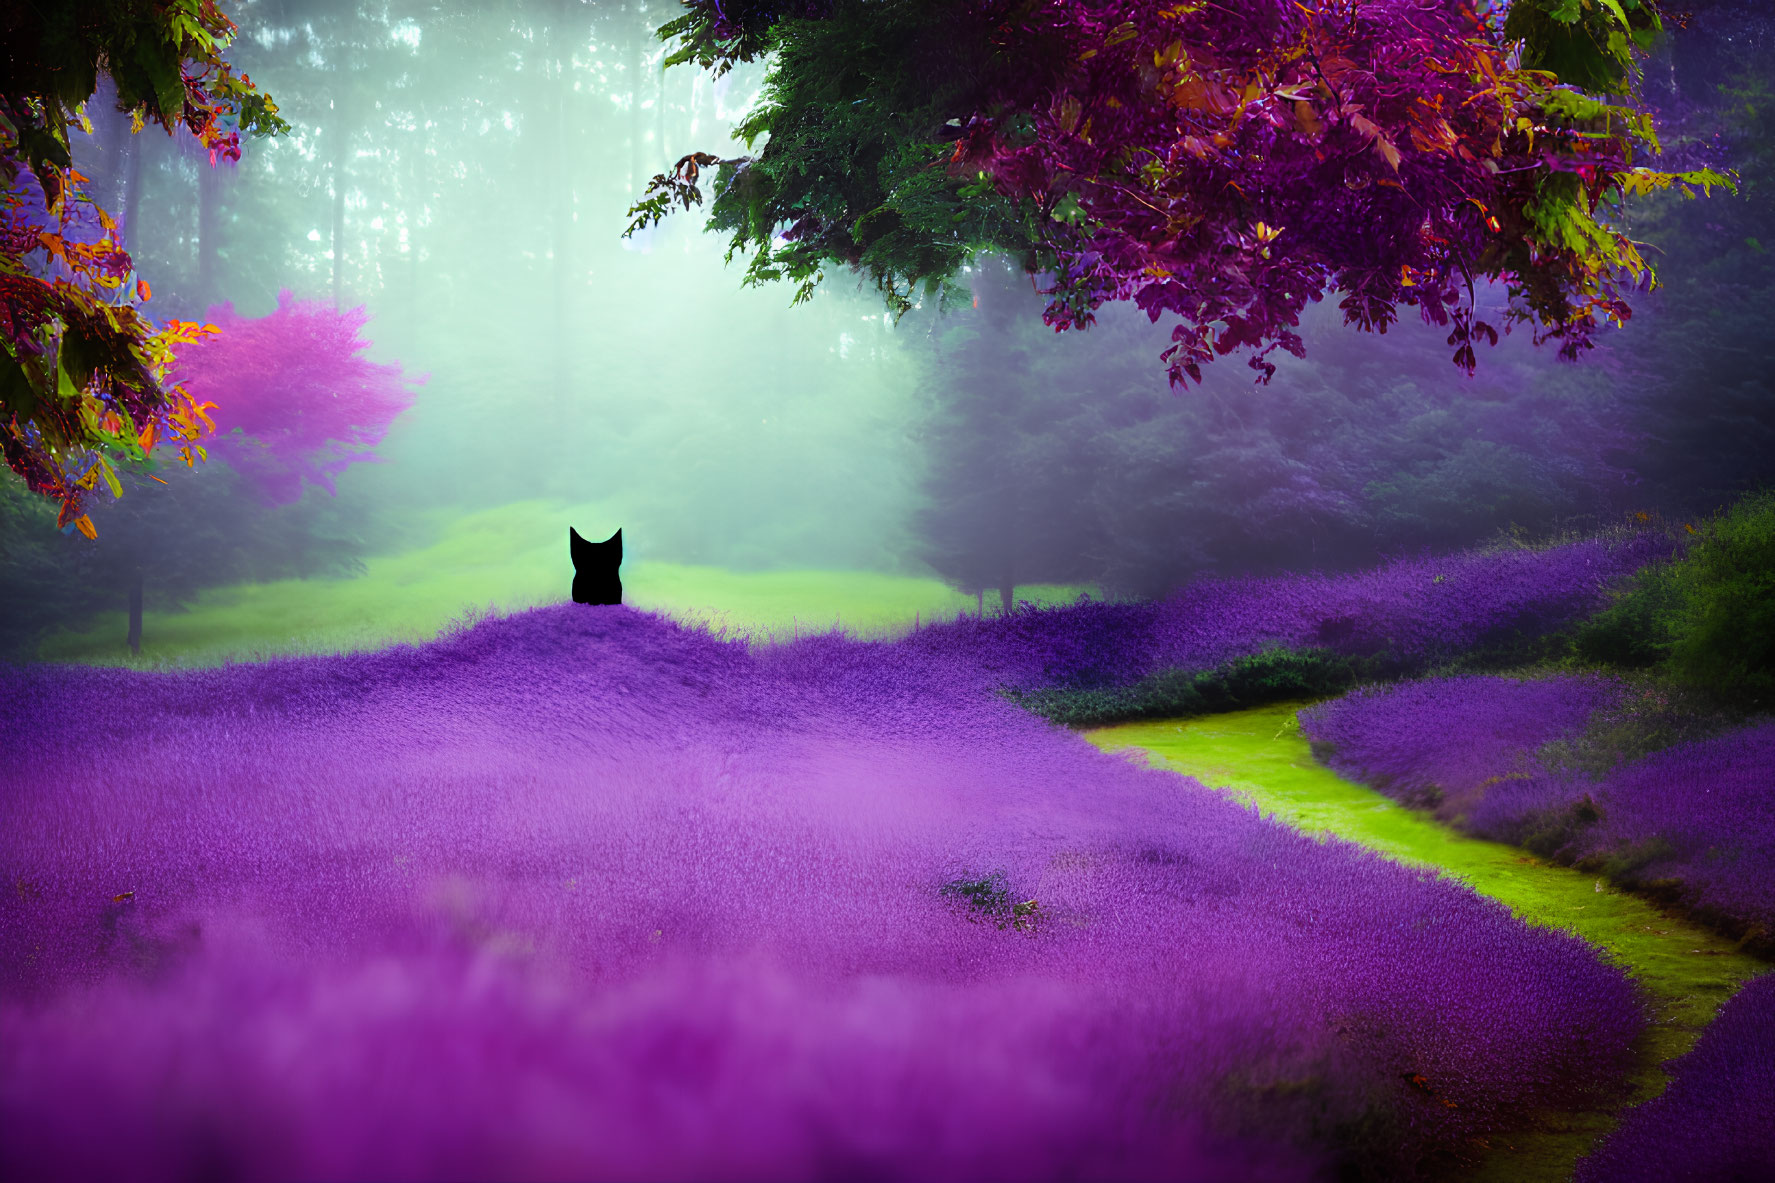 Purple Flower Field with Black Cat in Lush Forest Setting